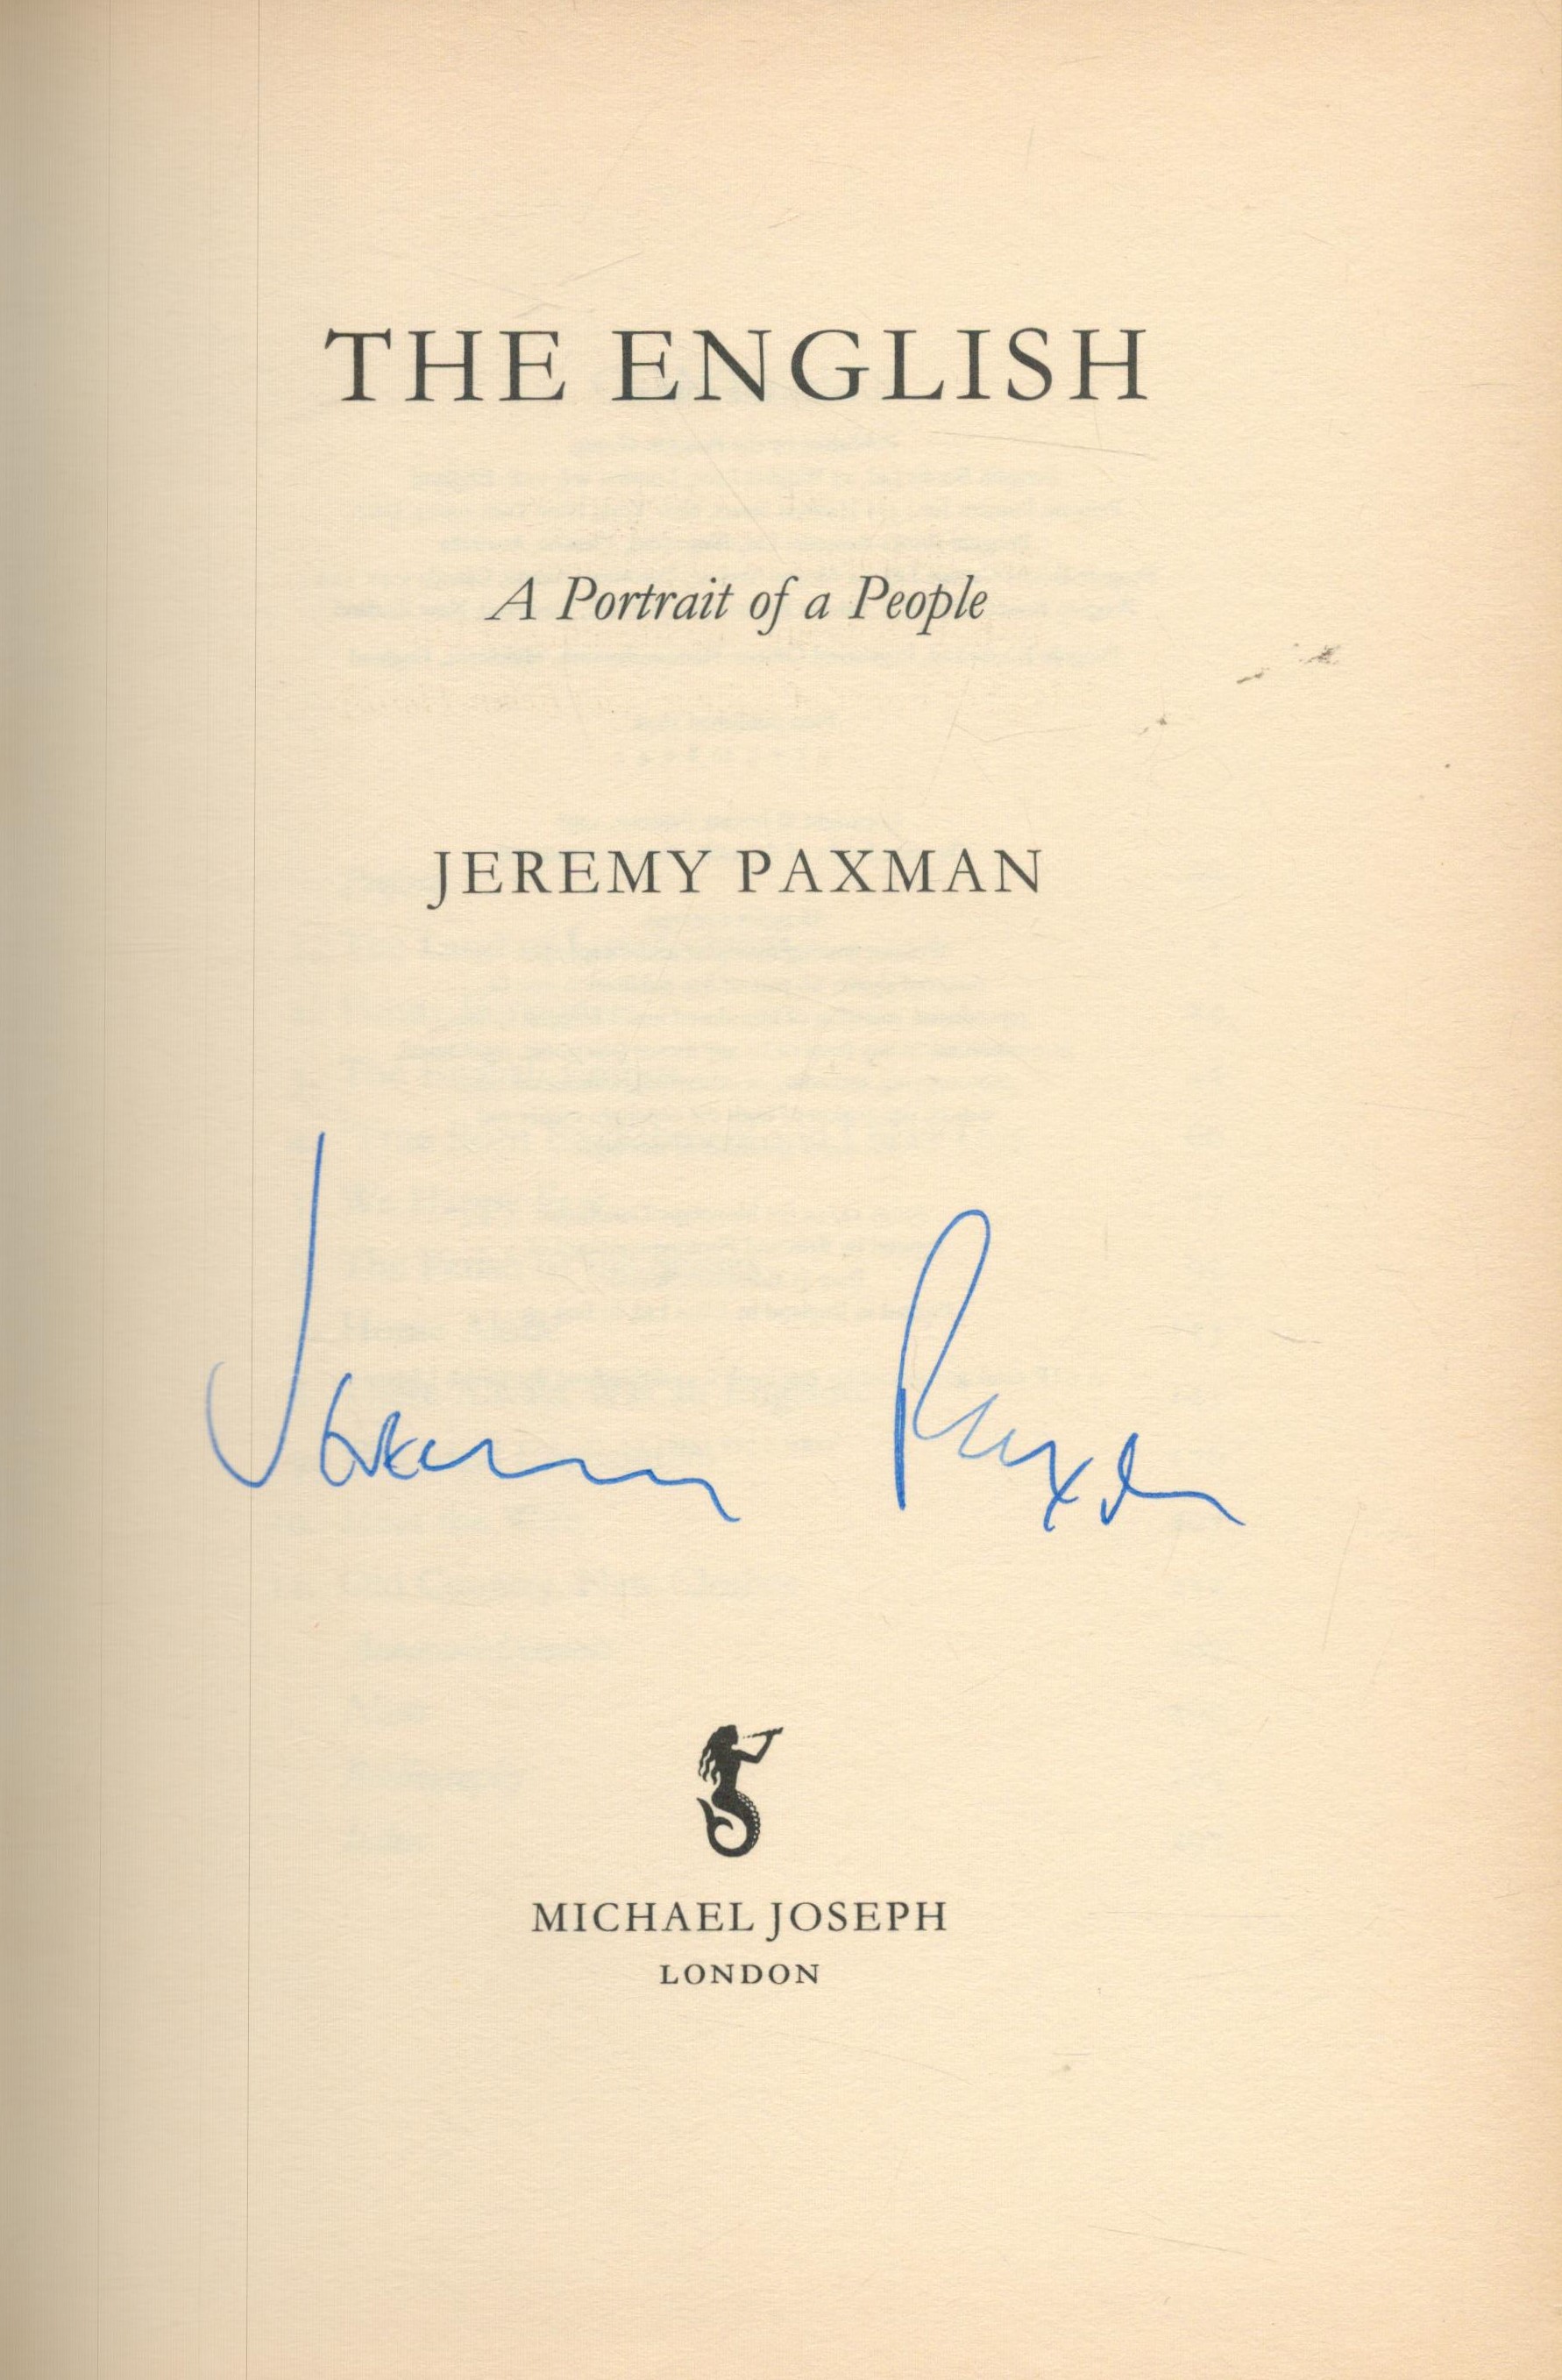 Jeremy Paxman Hardback Book The English A Portrait of People signed by the Author on the Title Page. - Image 2 of 3